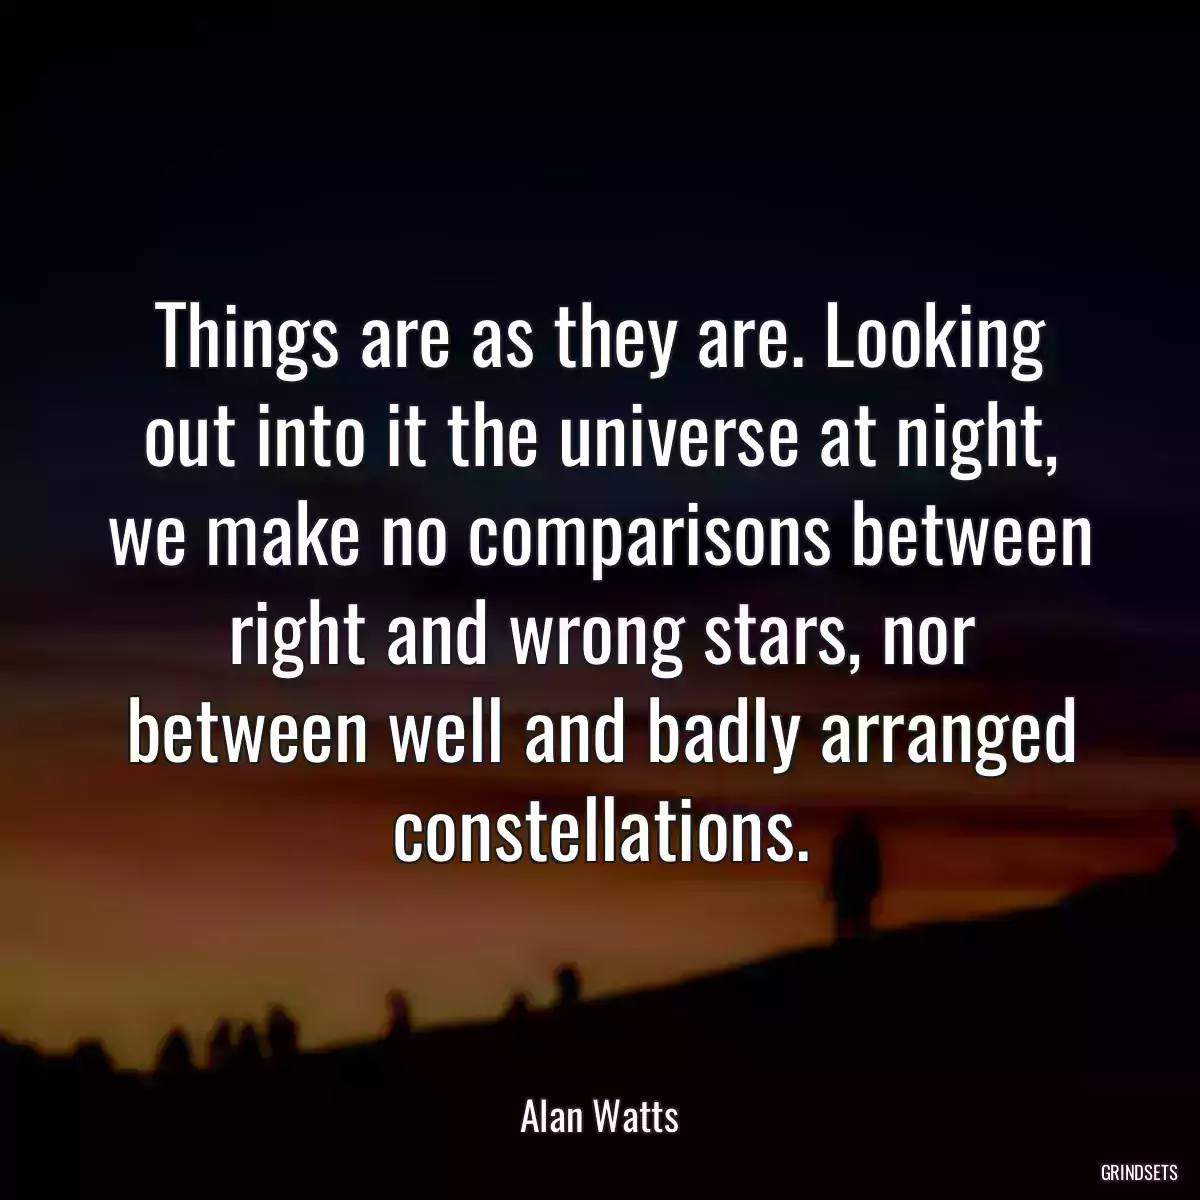 Things are as they are. Looking out into it the universe at night, we make no comparisons between right and wrong stars, nor between well and badly arranged constellations.